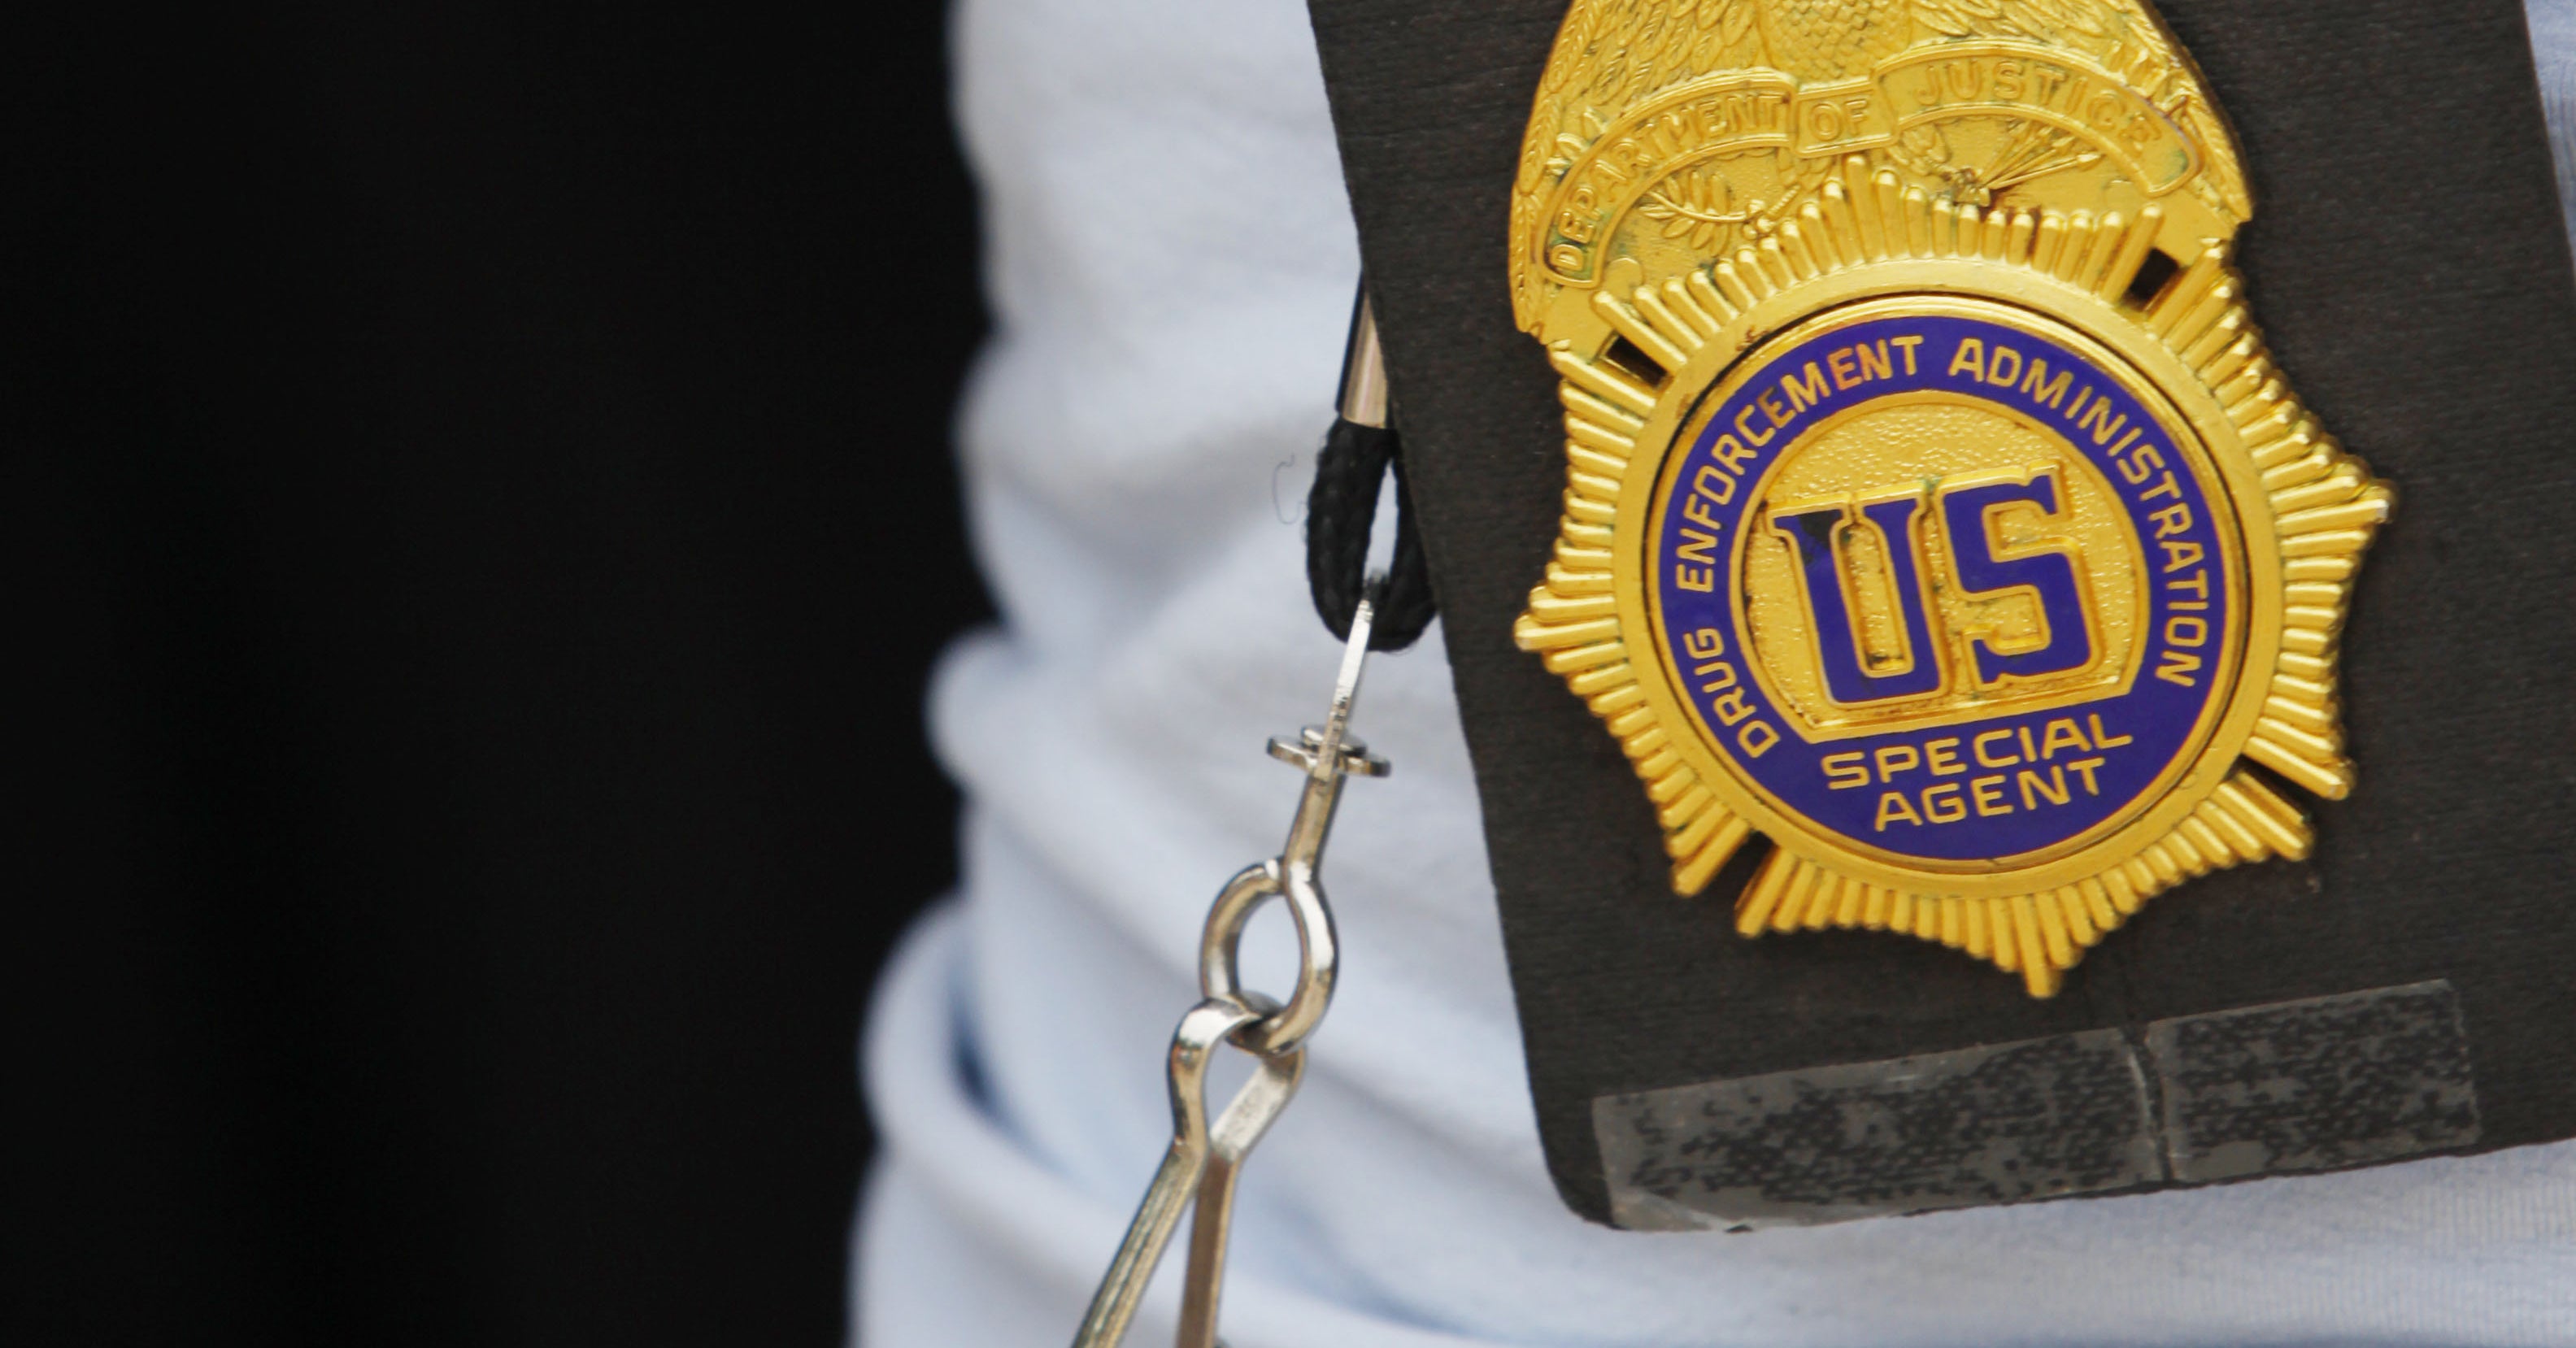 A Veteran Dea Agent Is Under Investigation In Colombia For Serious Corruption Allegations